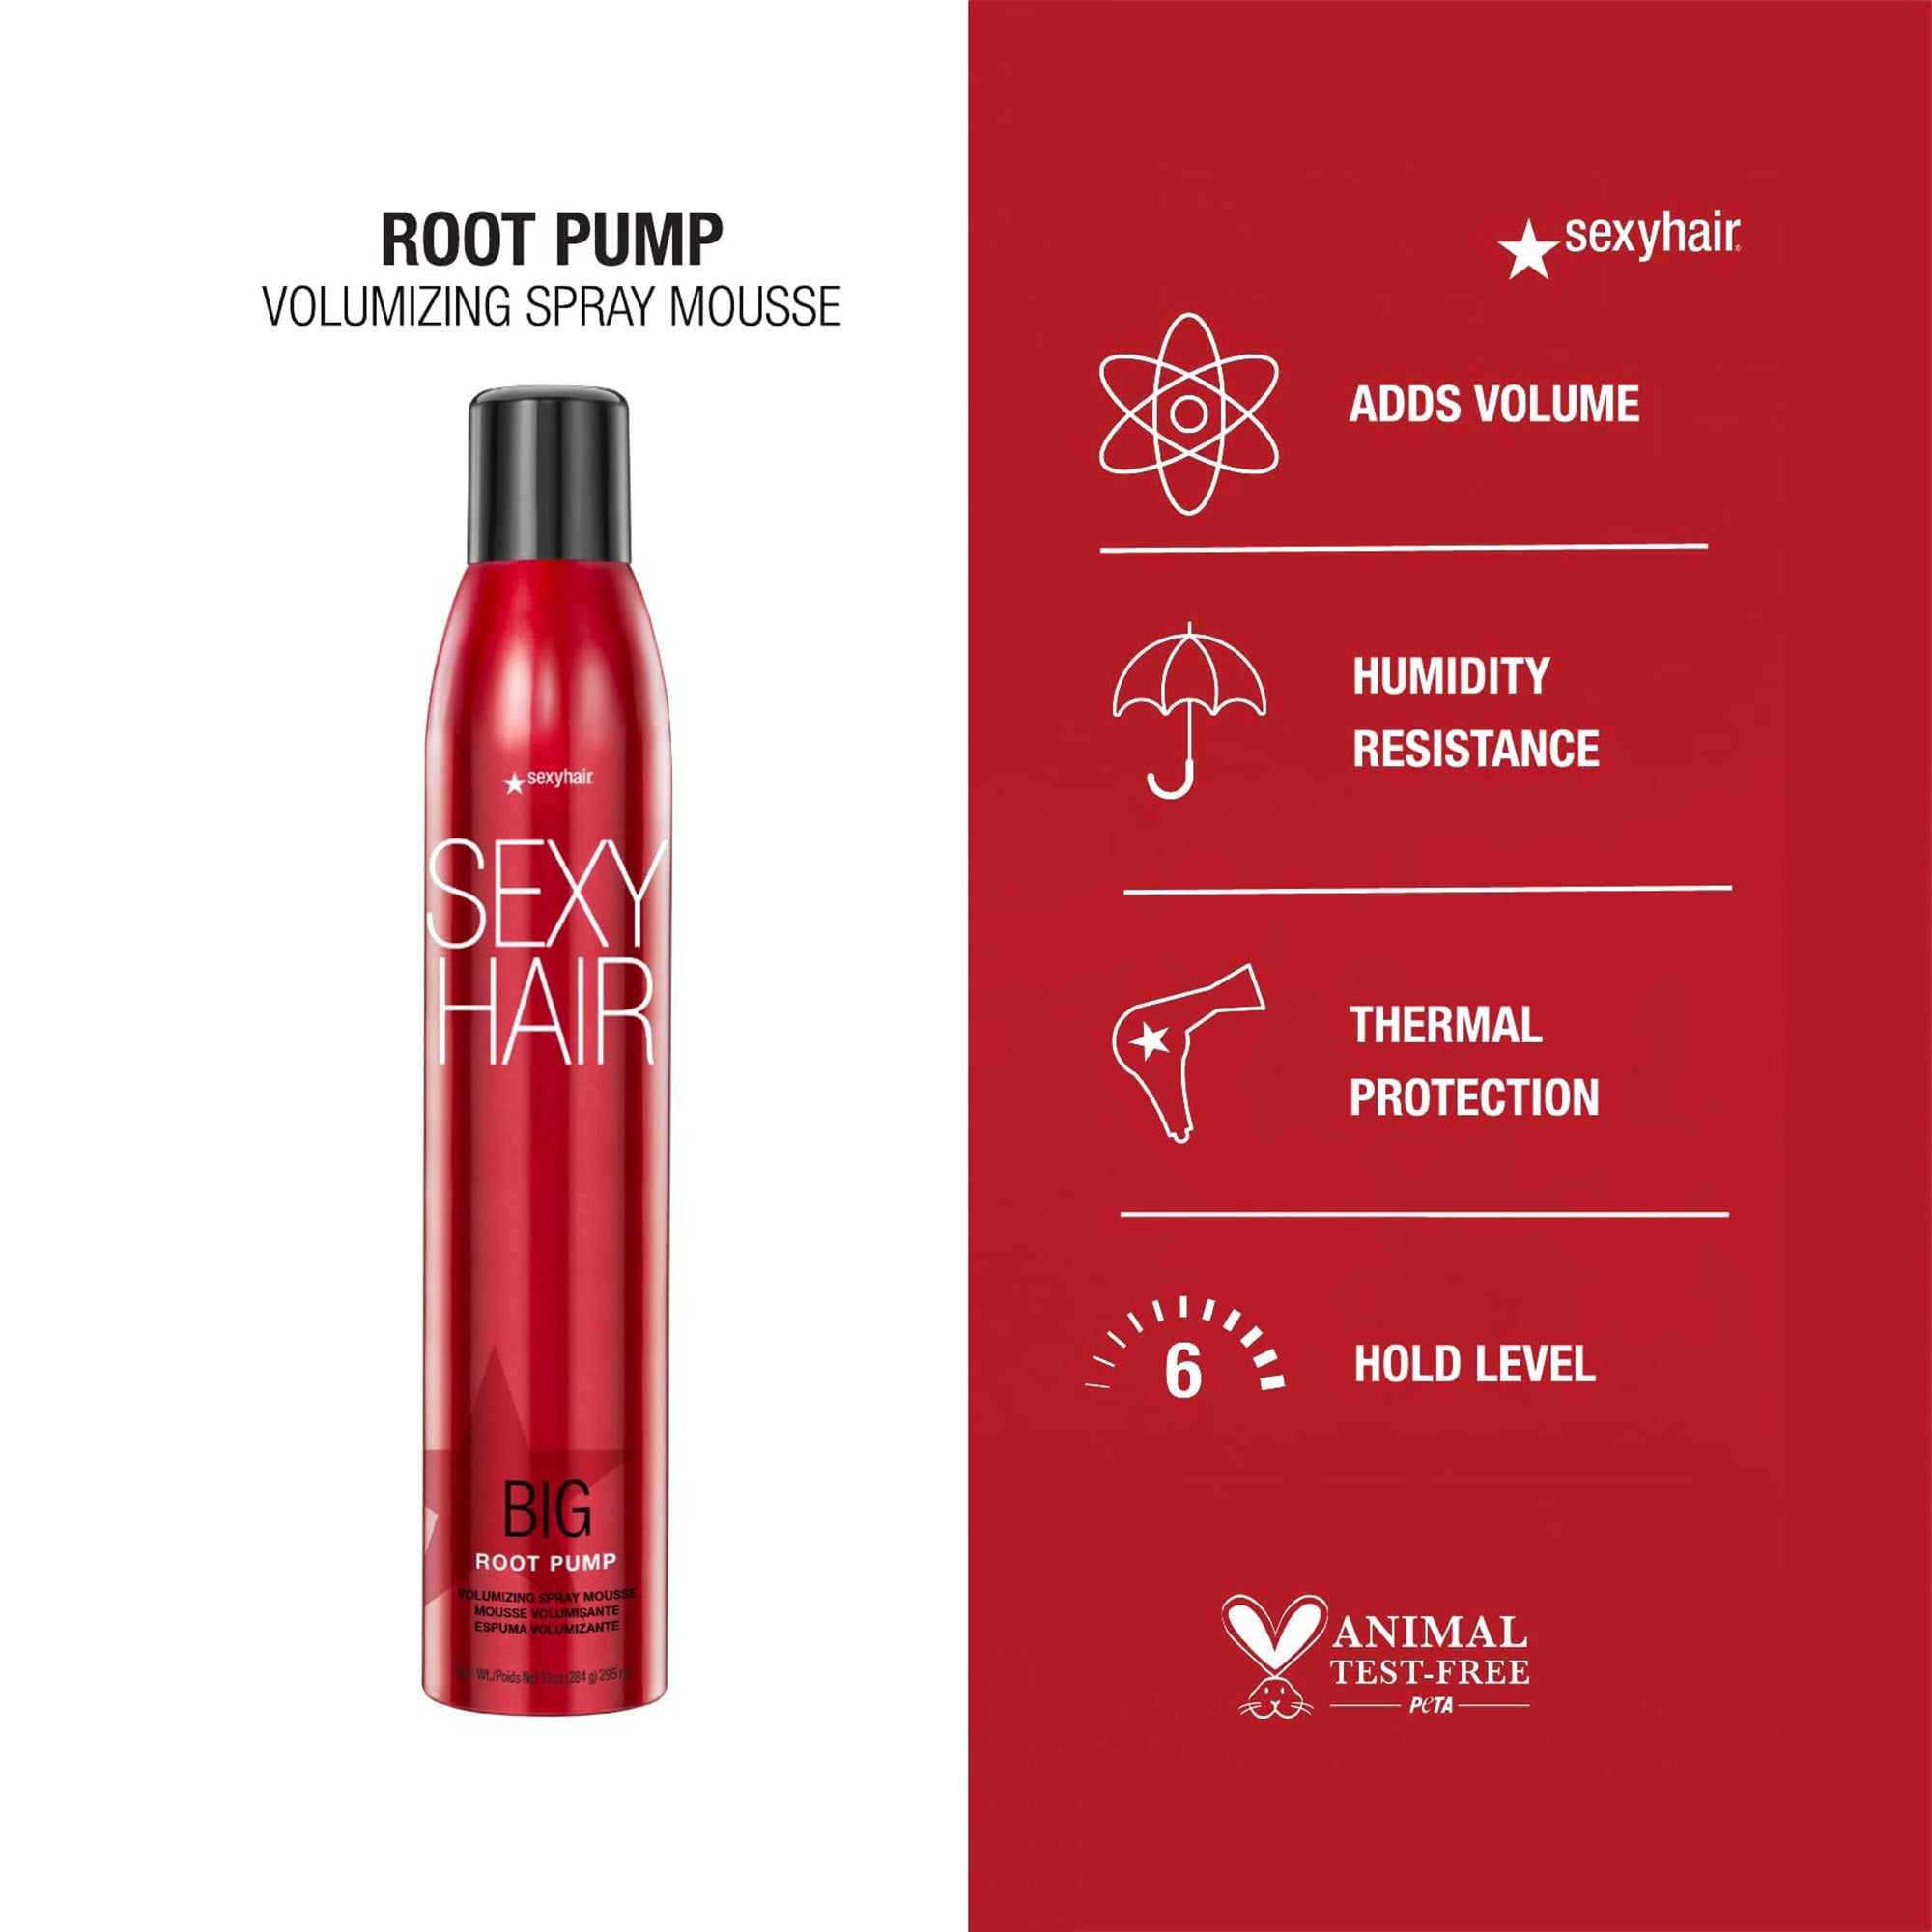 Sexy Hair Big SexyHair Root Pump Humidity Resistant Volumizing Spray Mousse / 10